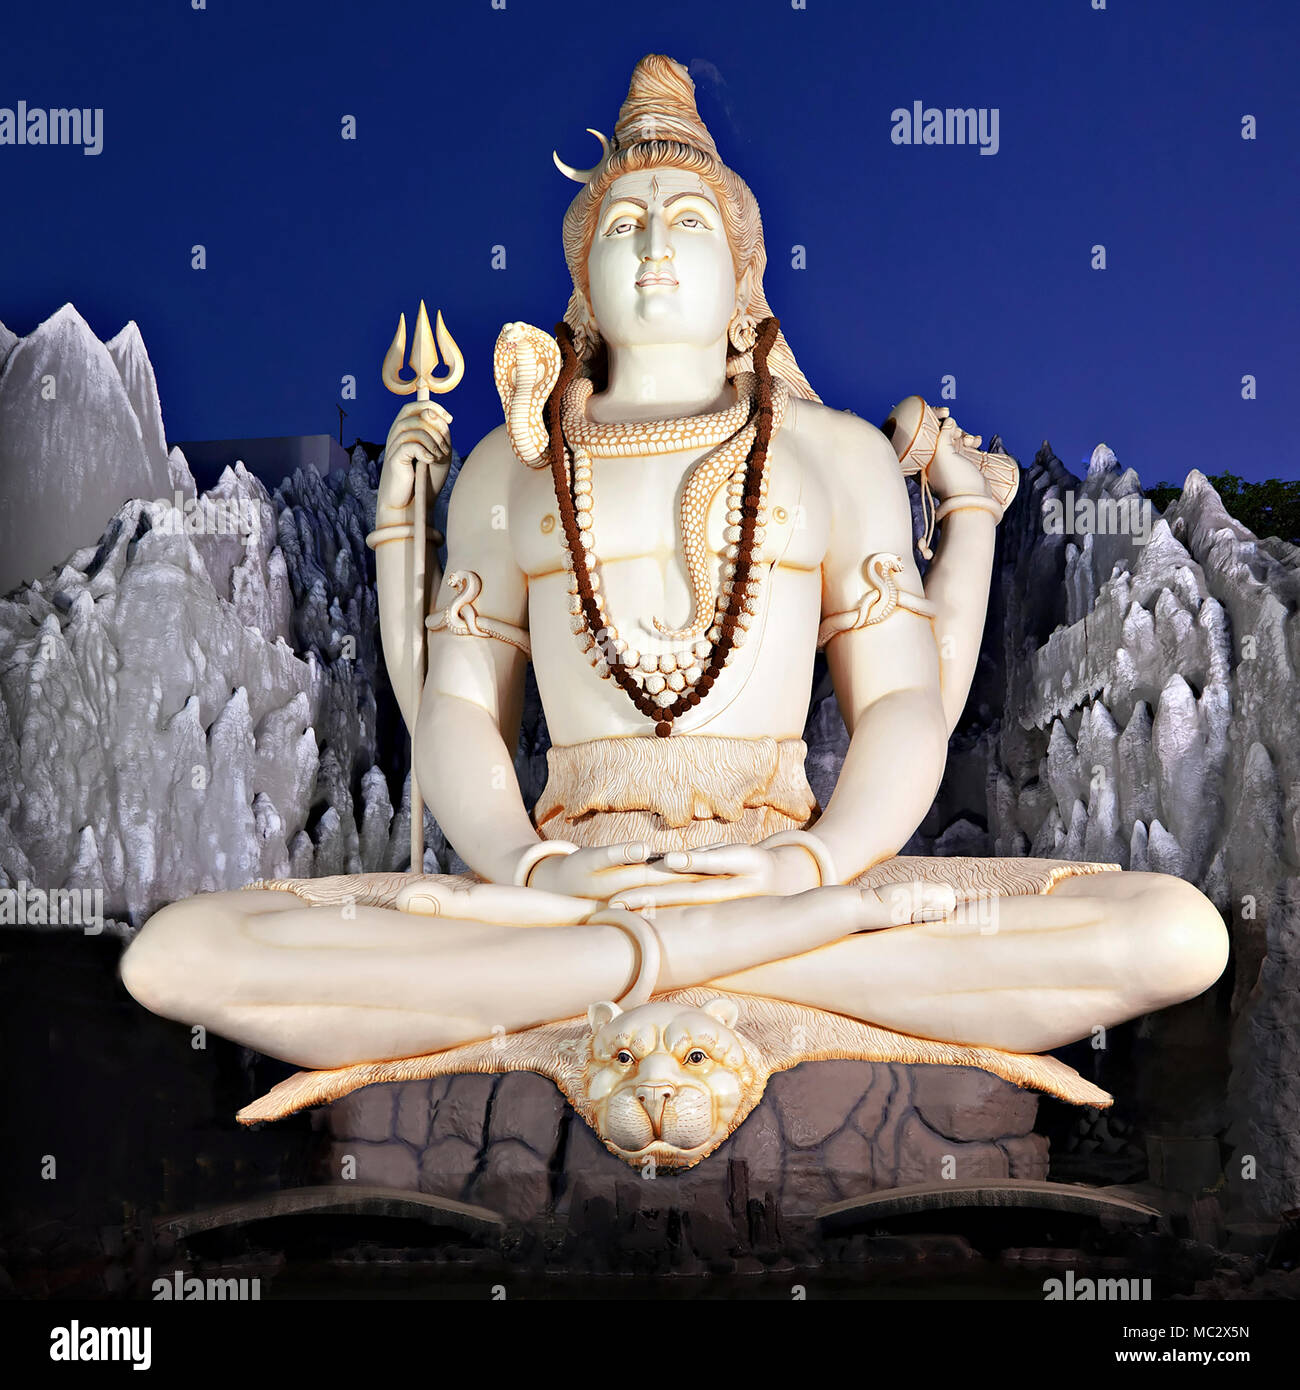 Lord Shiva big statue sitting in lotus pose with trident in Murugeshpalya Temple in Bangalore, India. This Shiva Statue is highest in the world. Stock Photo